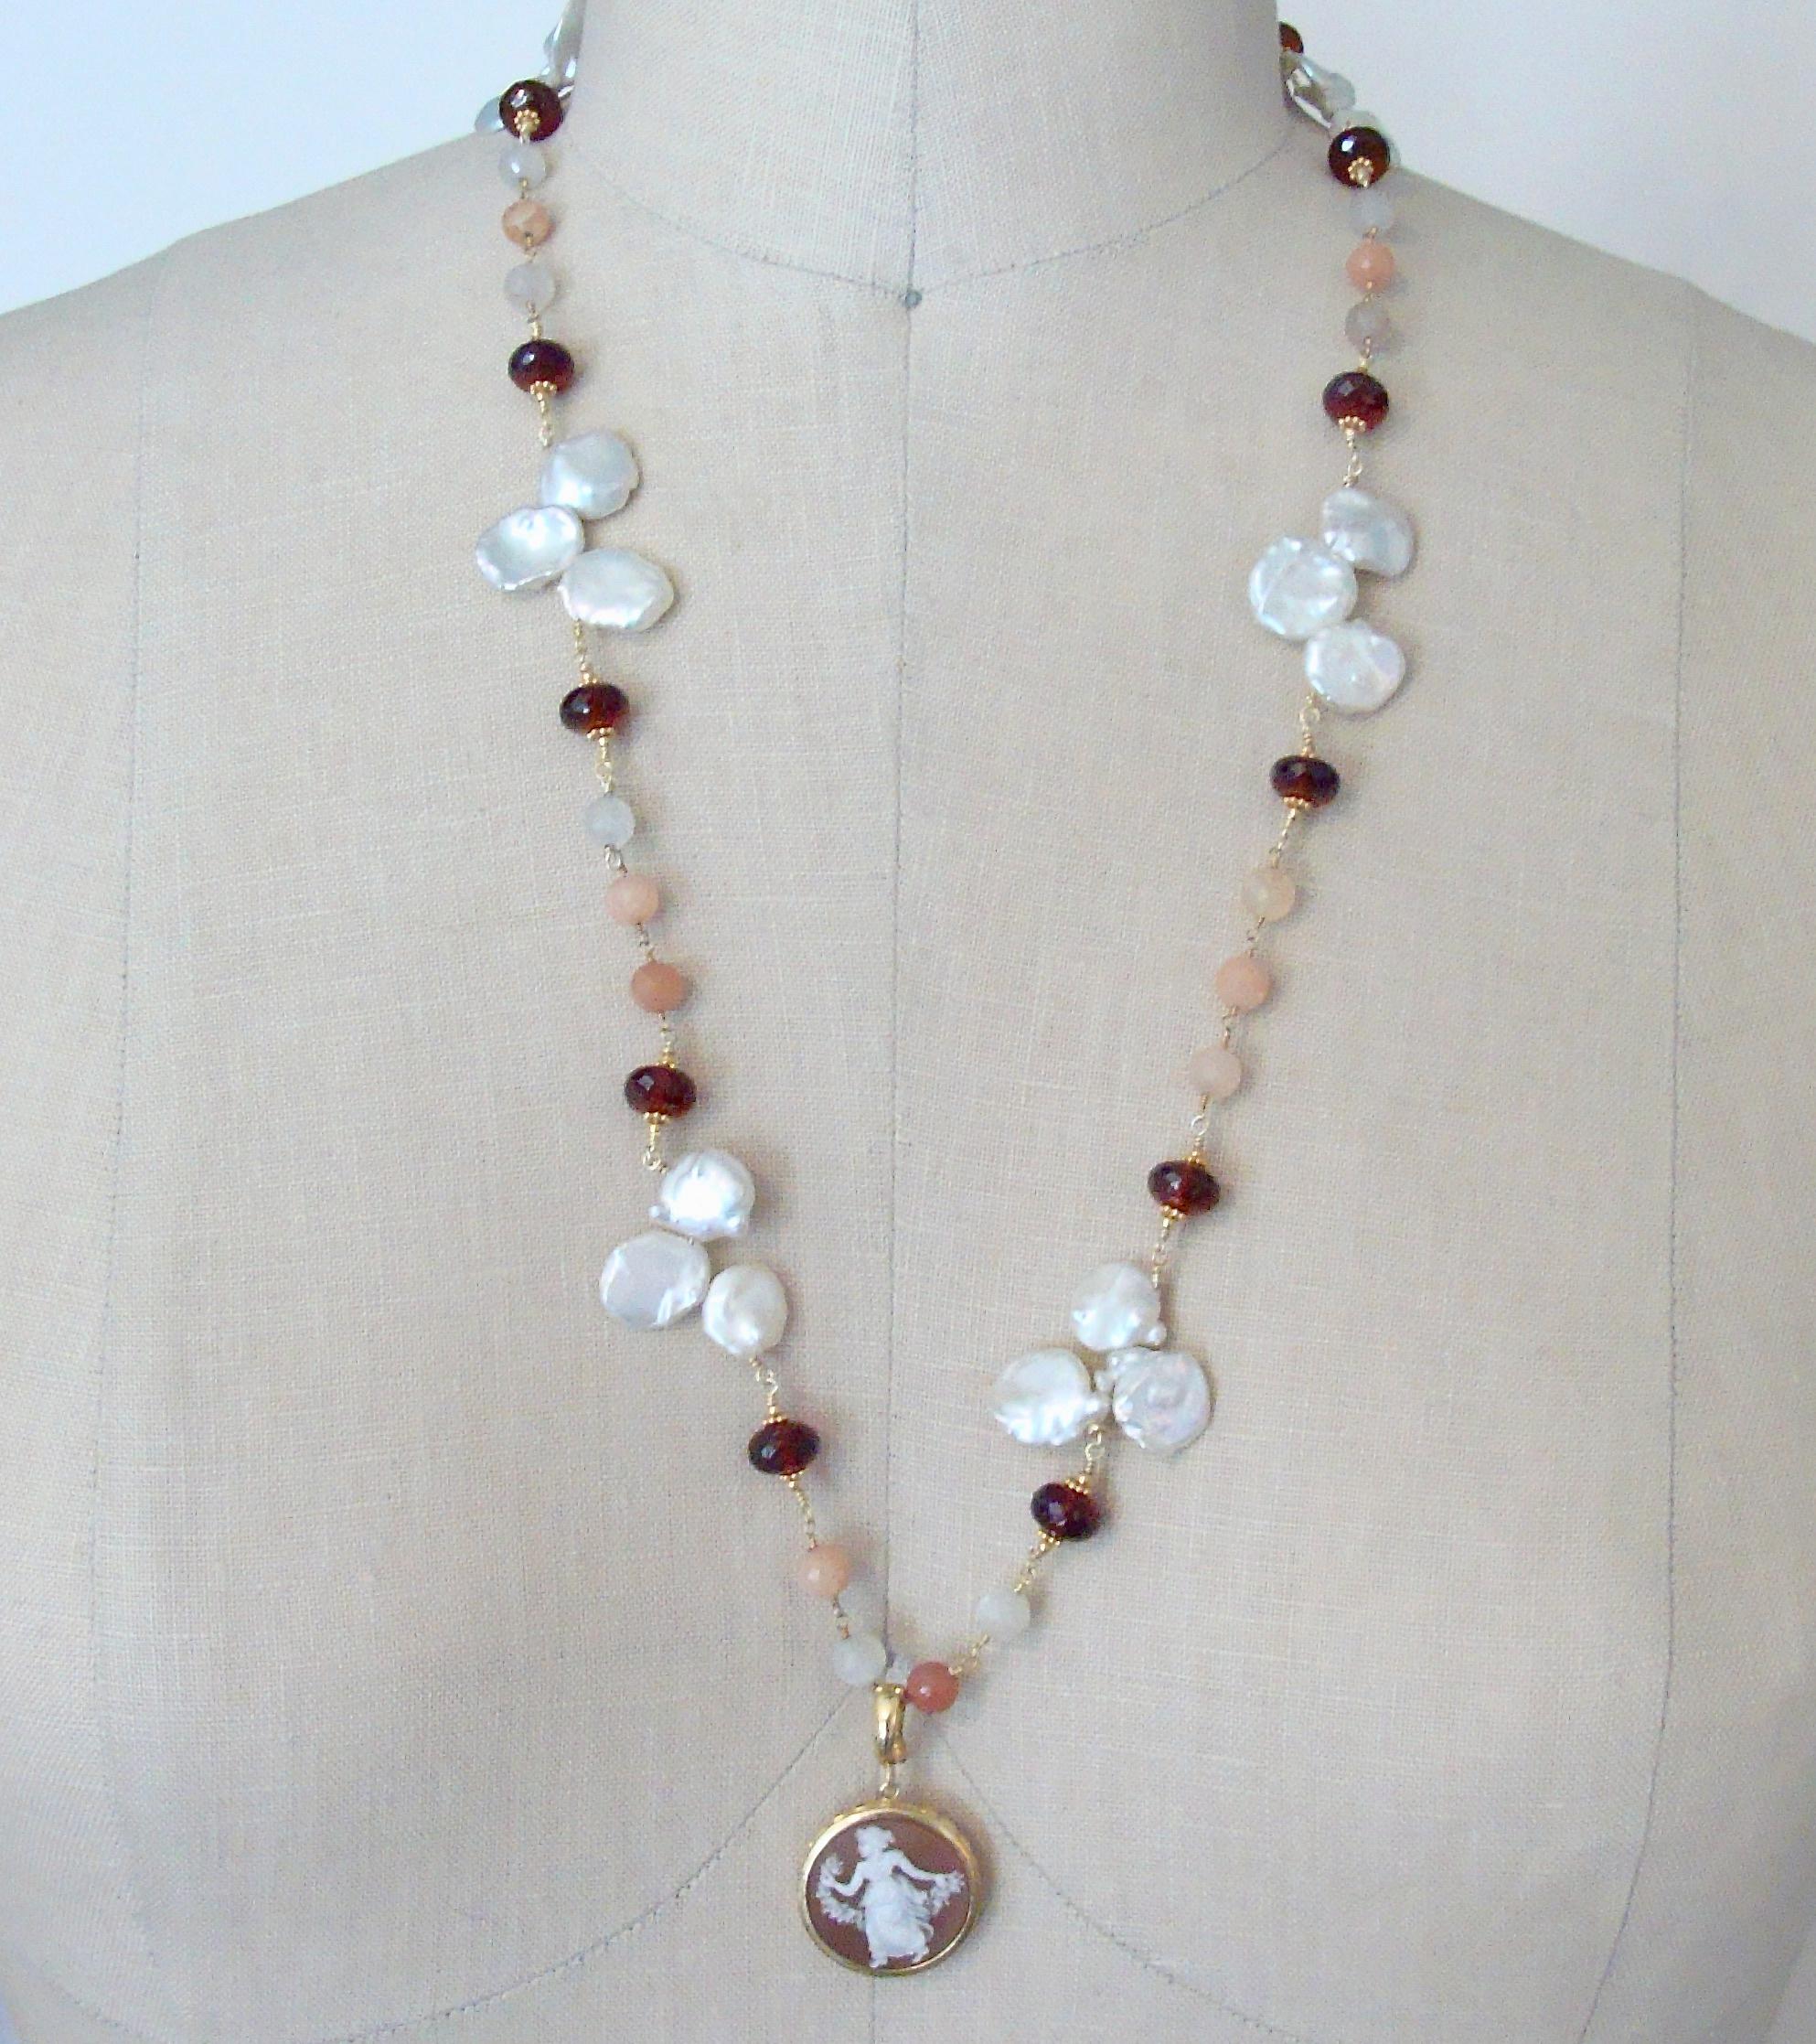 Sardonyx Cameo Pendant & Moonstone, Hessonite & Petal Pearls Necklace - Sardinia In New Condition For Sale In Colleyville, TX